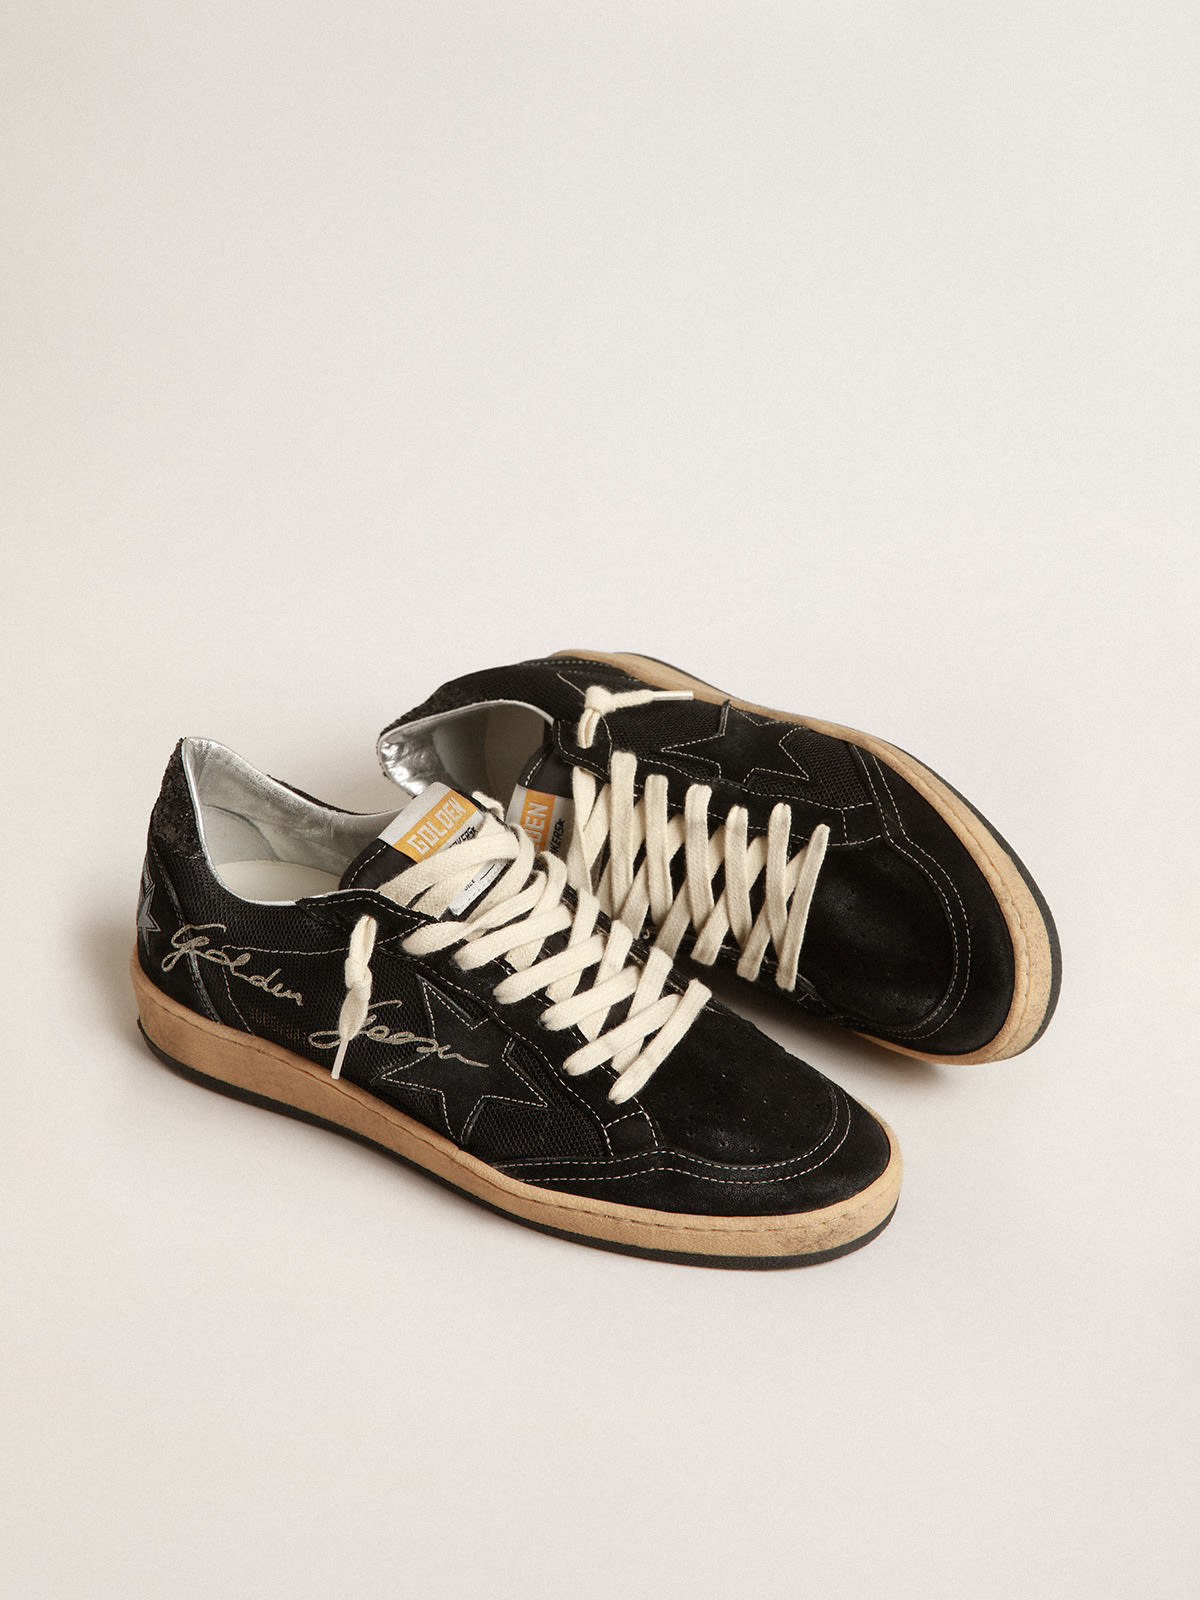 Golden Goose - Ball Star in black mesh with black suede star in 